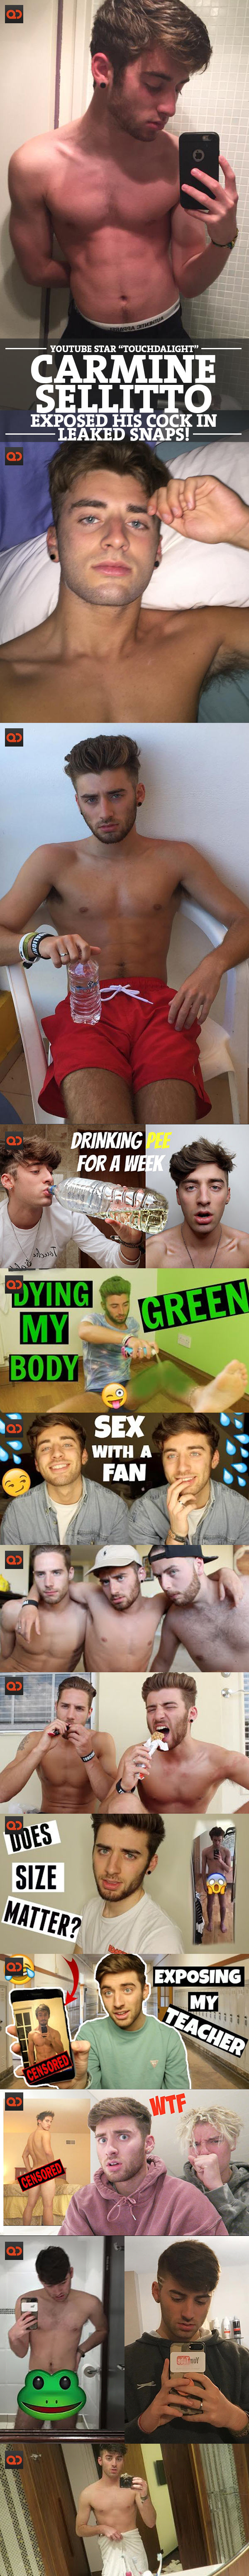 Carmine Sellitto, YouTube Star “Touchdalight”, Exposed His Cock In Leaked Snaps!